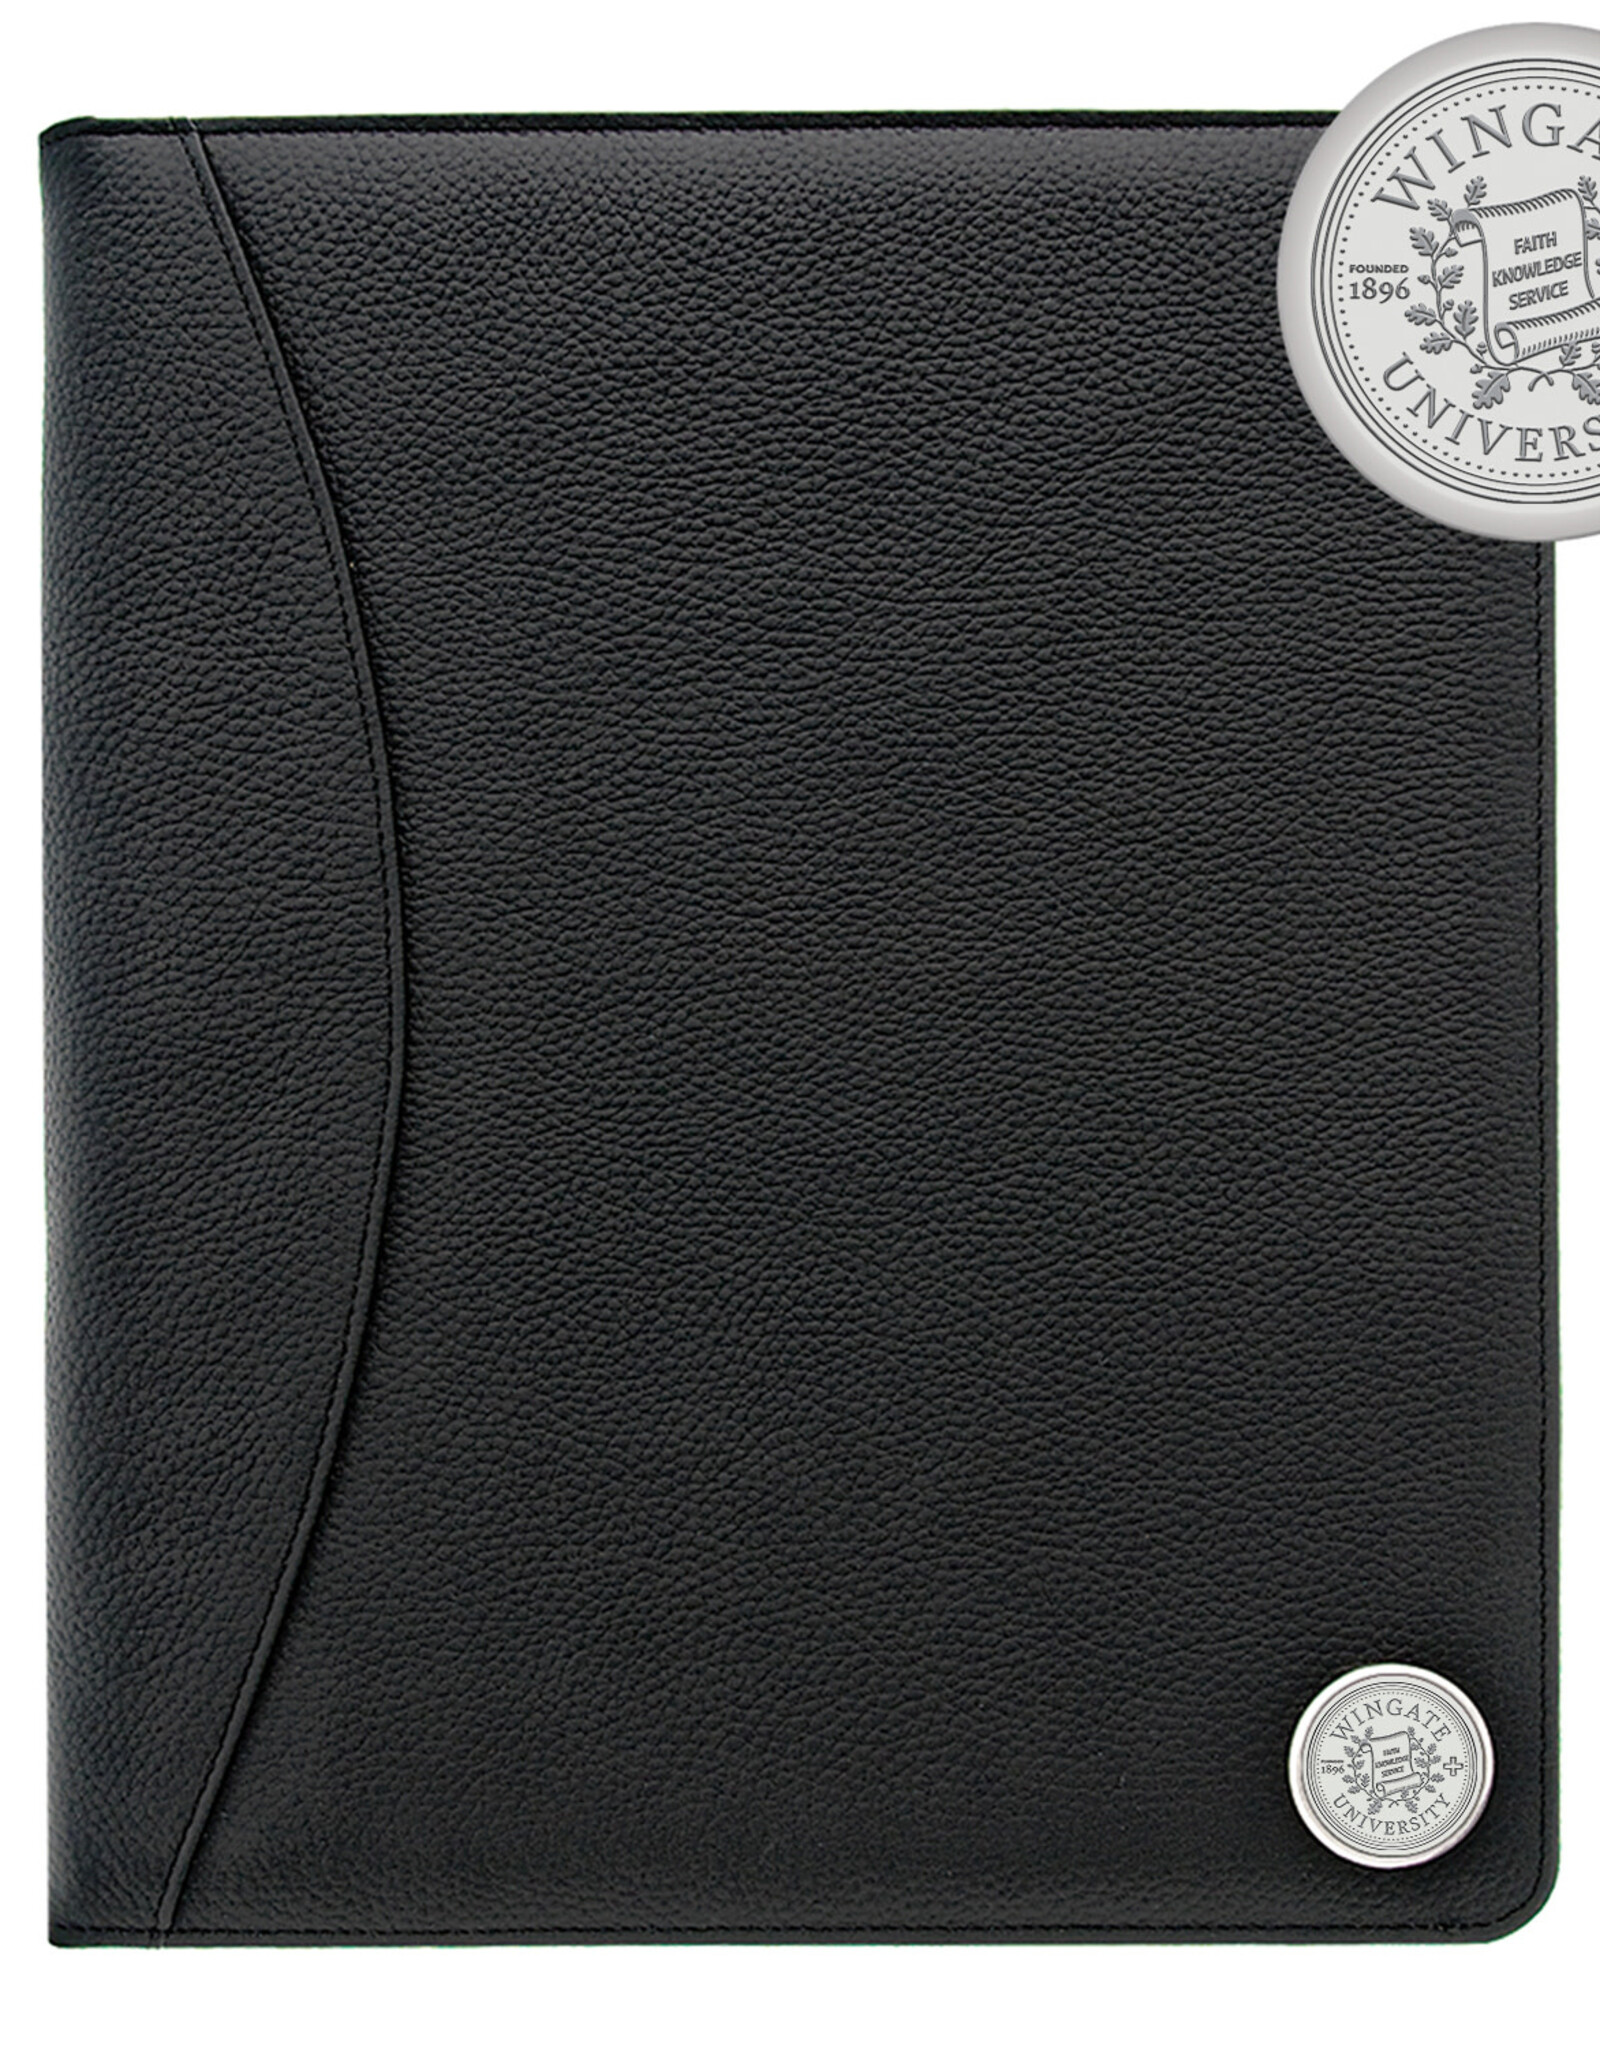 DROP SHIP ONLY Black Leather Portfolio with silver Wingate University Seal (ONLINE ONLY)